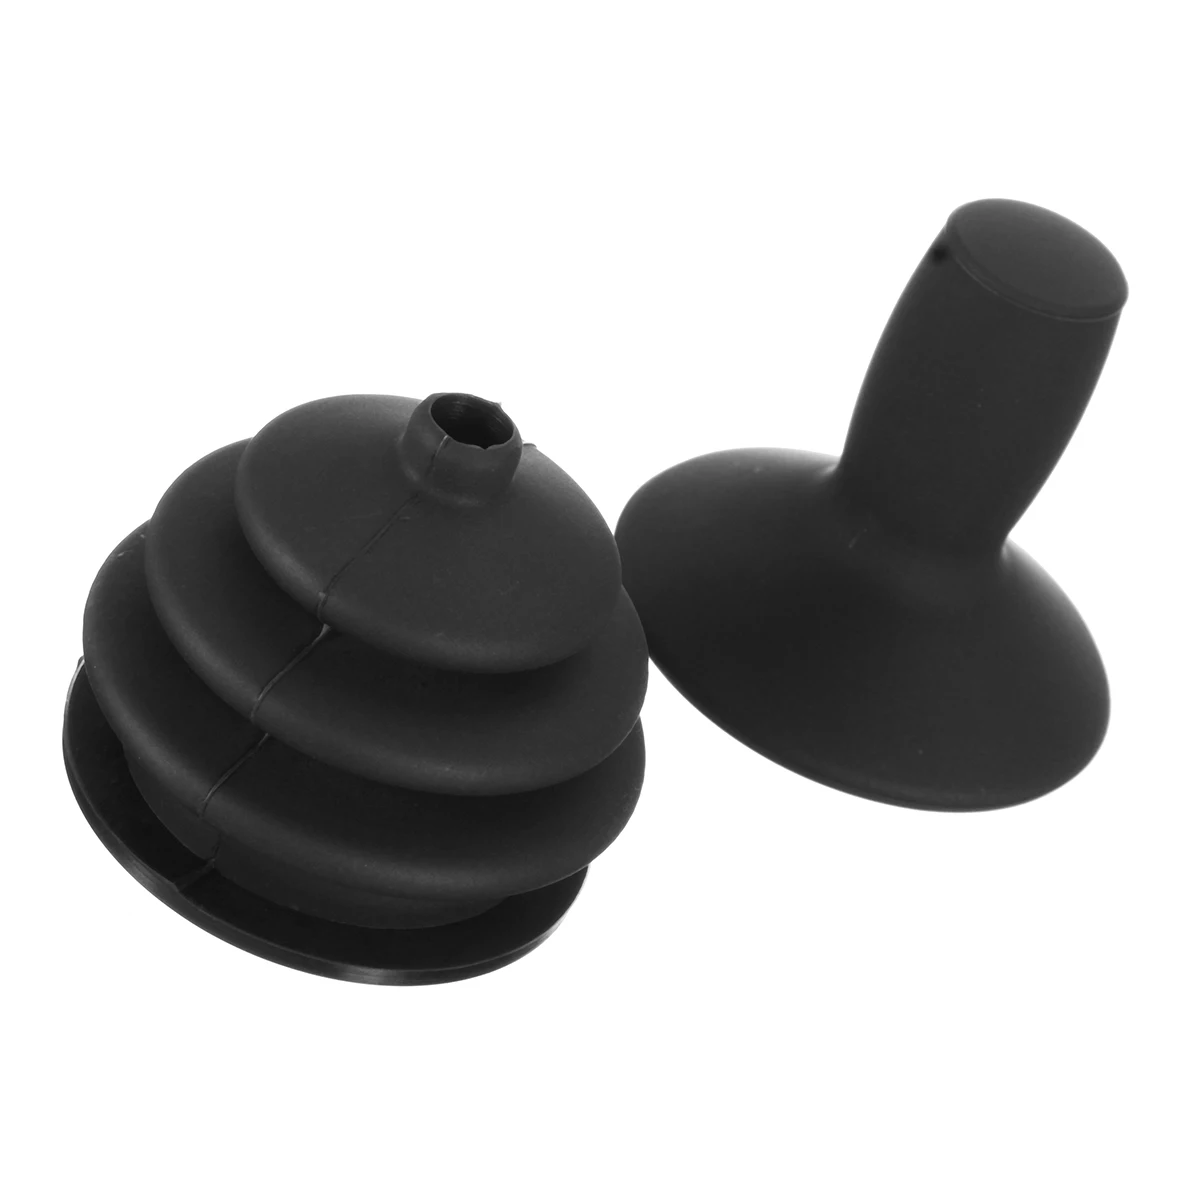 

Joystick Controller Knob For Electric Wheelchair Folding Power Chair Mobility Aid Silicon Rubber Controller Power Option